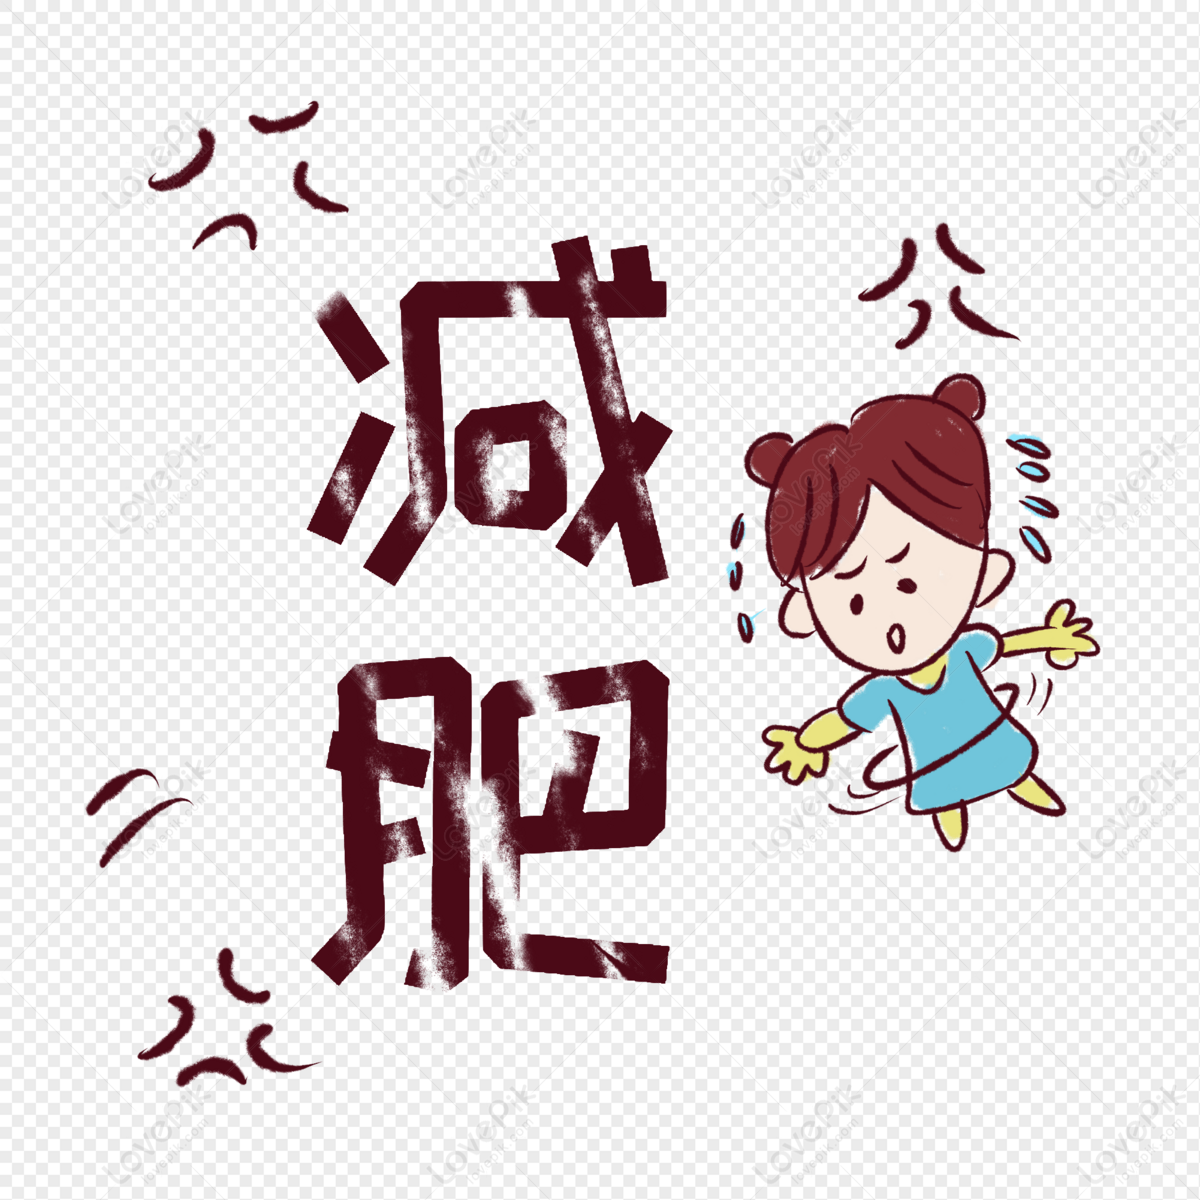 Slim Girl, Chinese Girl, Animated Girl, Blue Girl PNG Free Download And ...